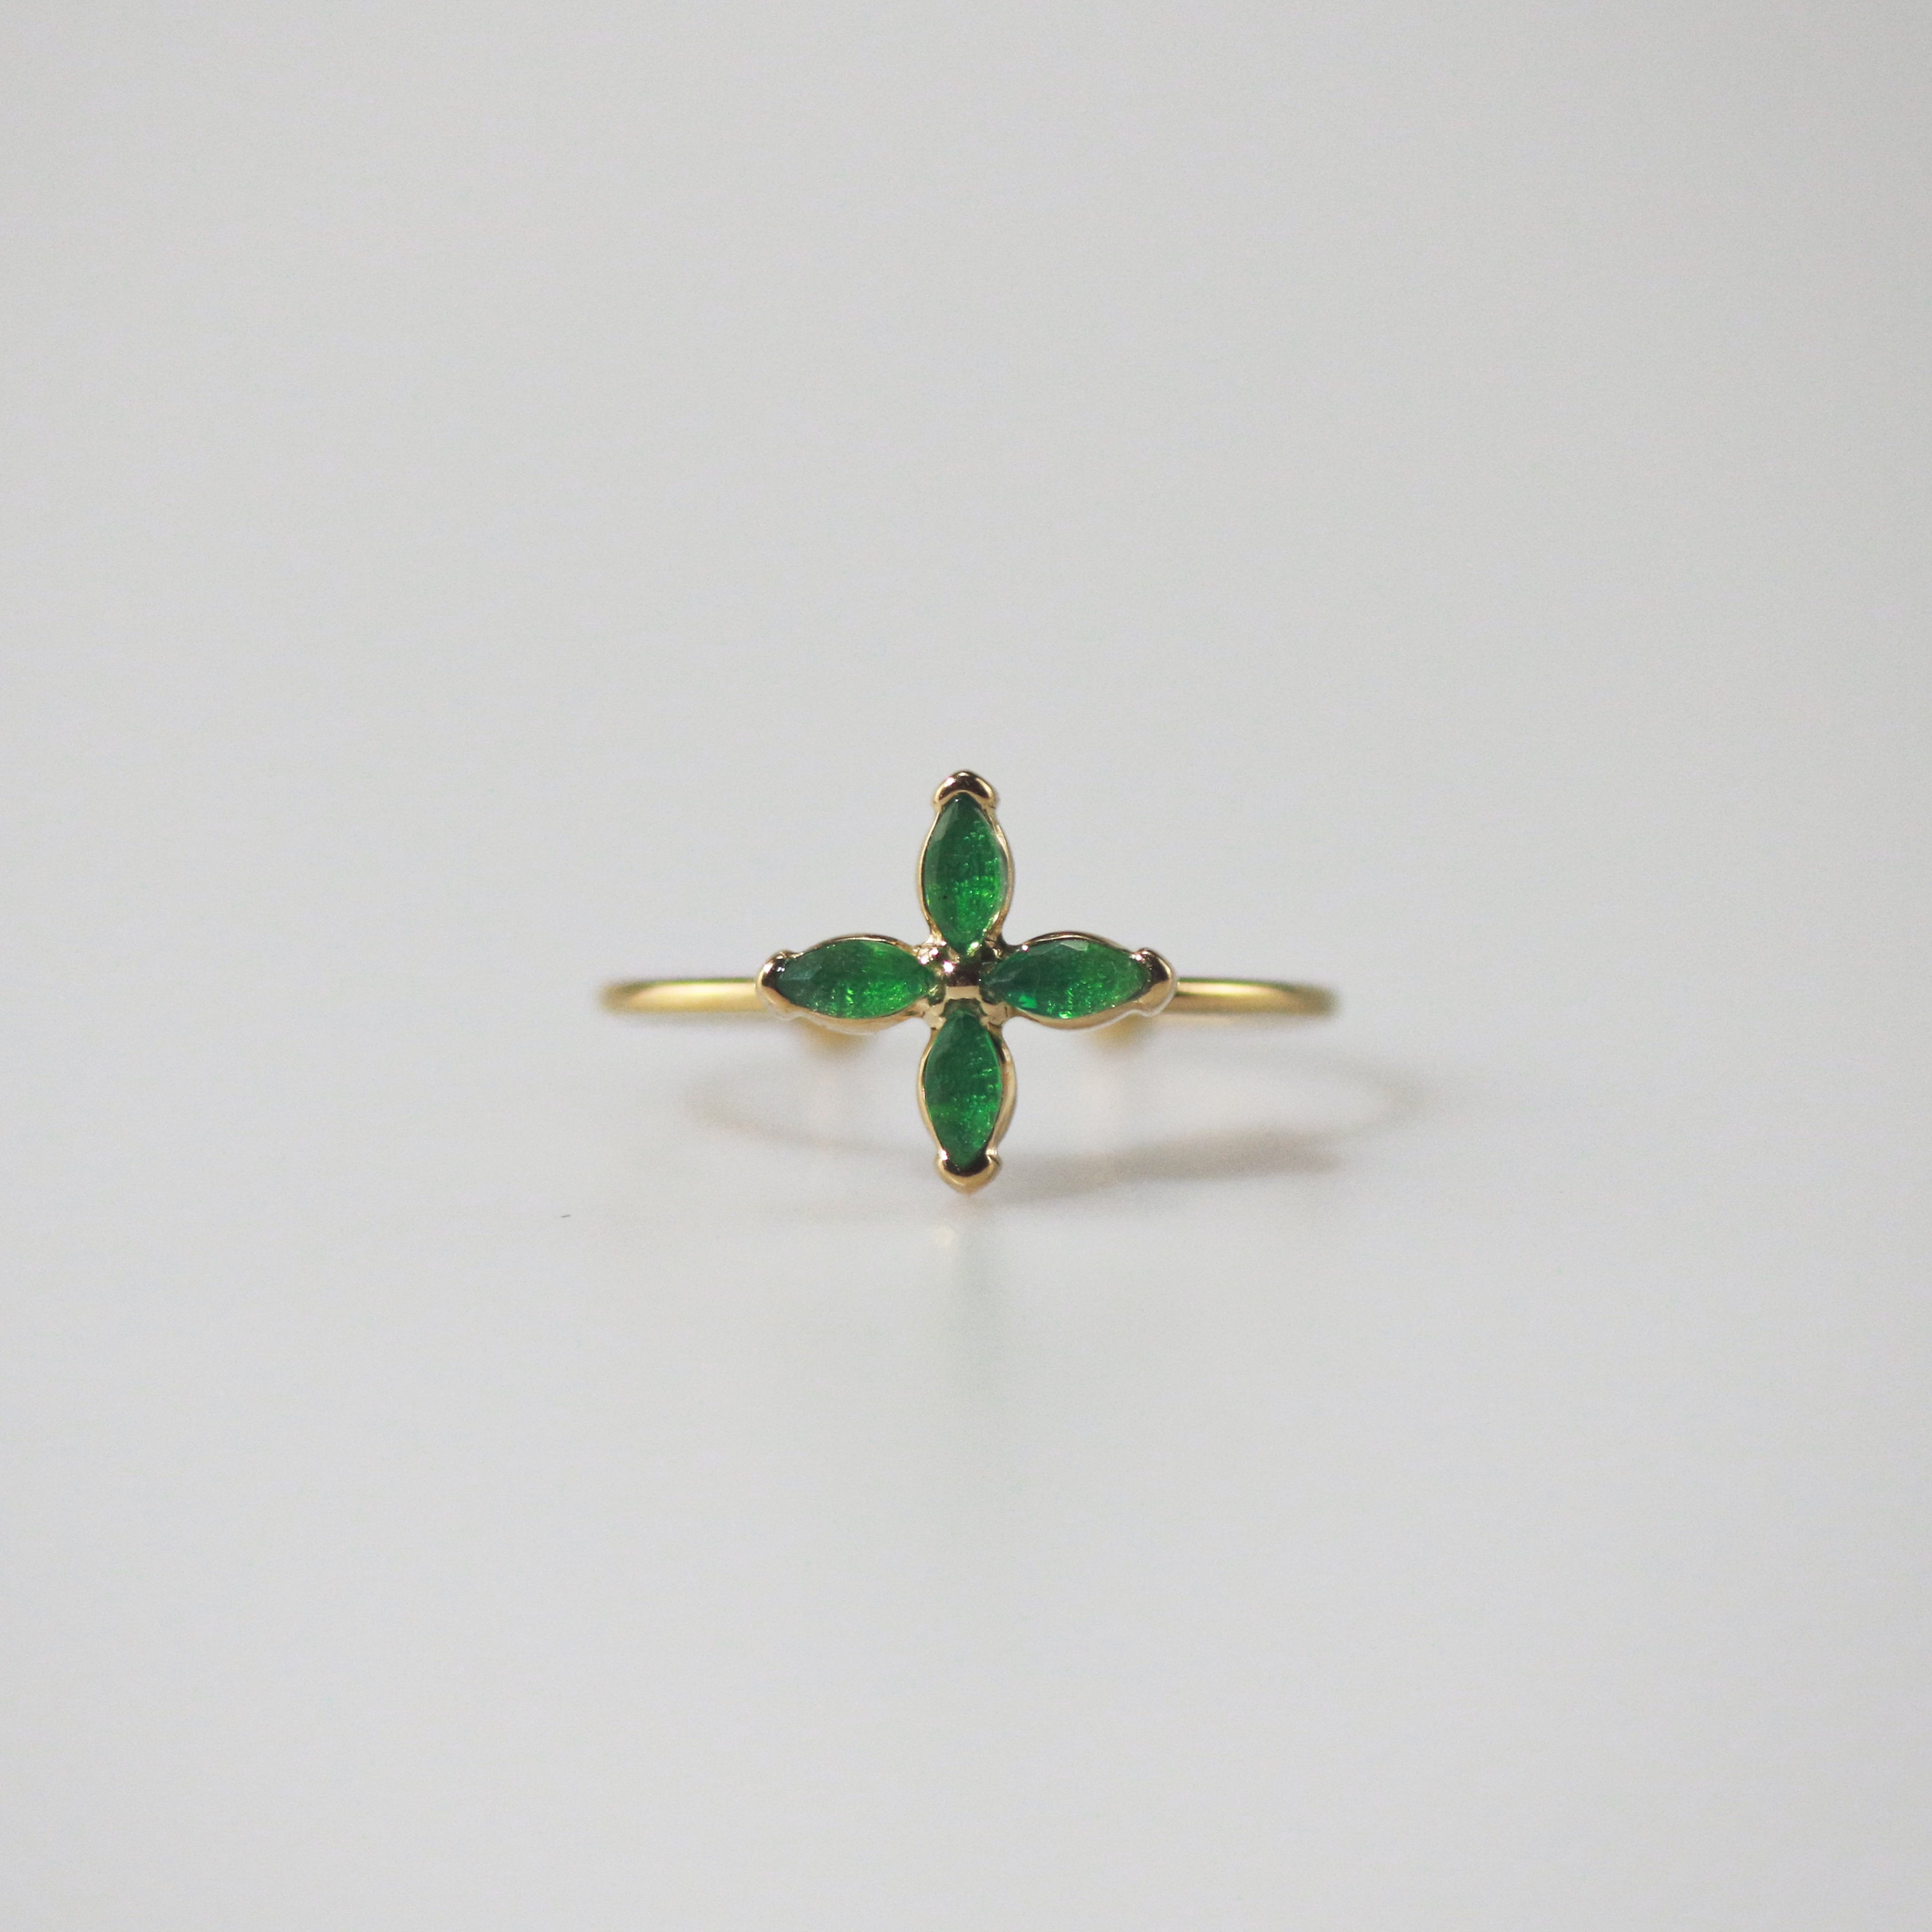 Meideya Jewelry Gold Clover Ring with green cubic zircon